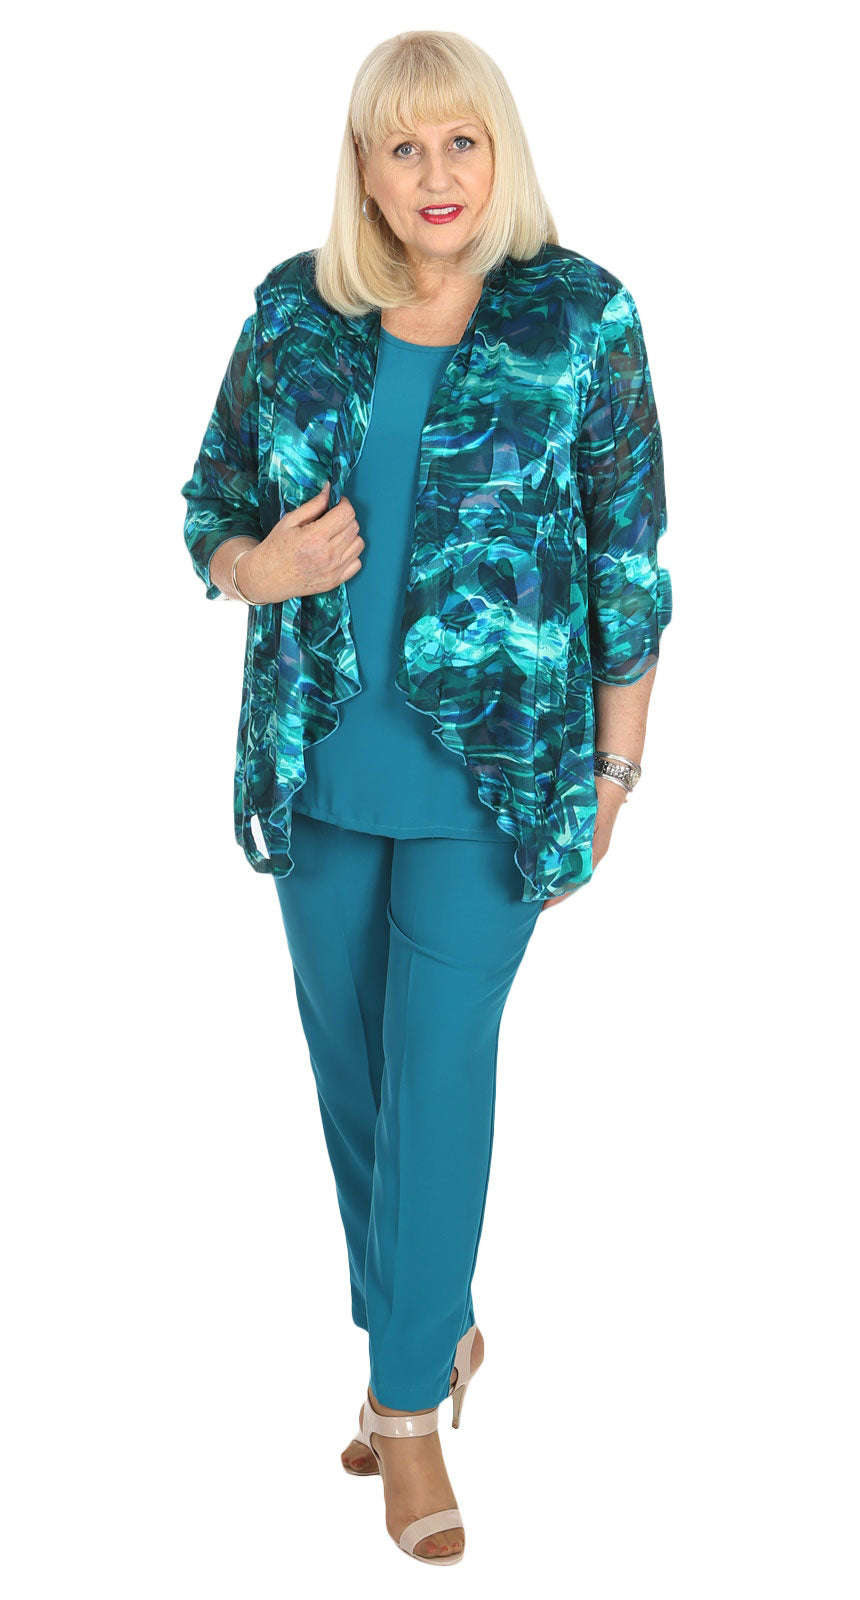 Sybil's Crepe Pant Teal